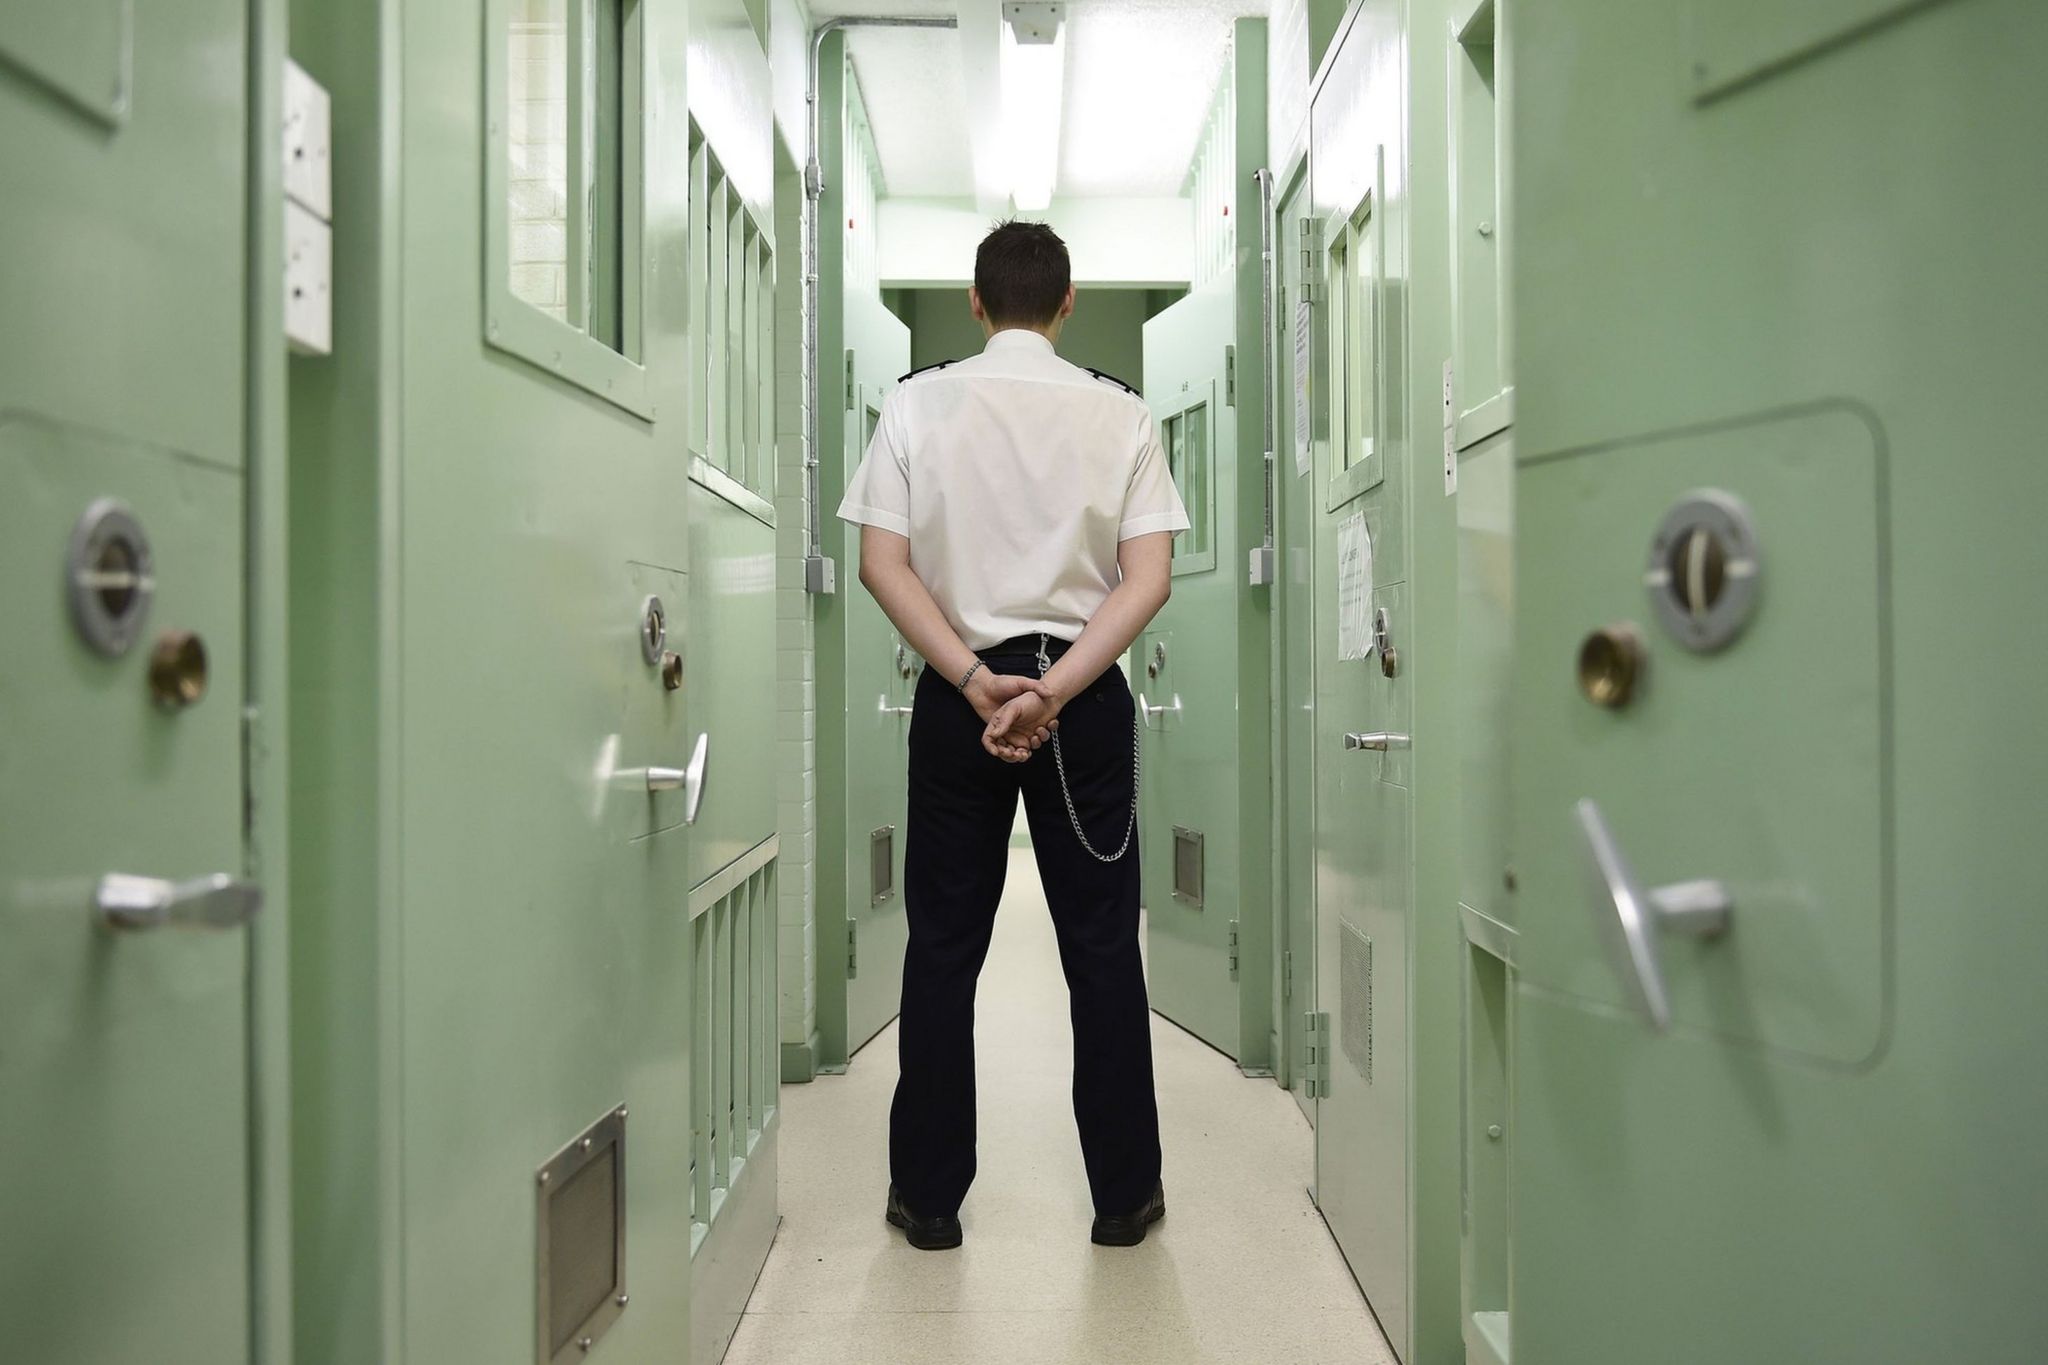 A prison guard stands in the corridor of a prison with his back to the camera.